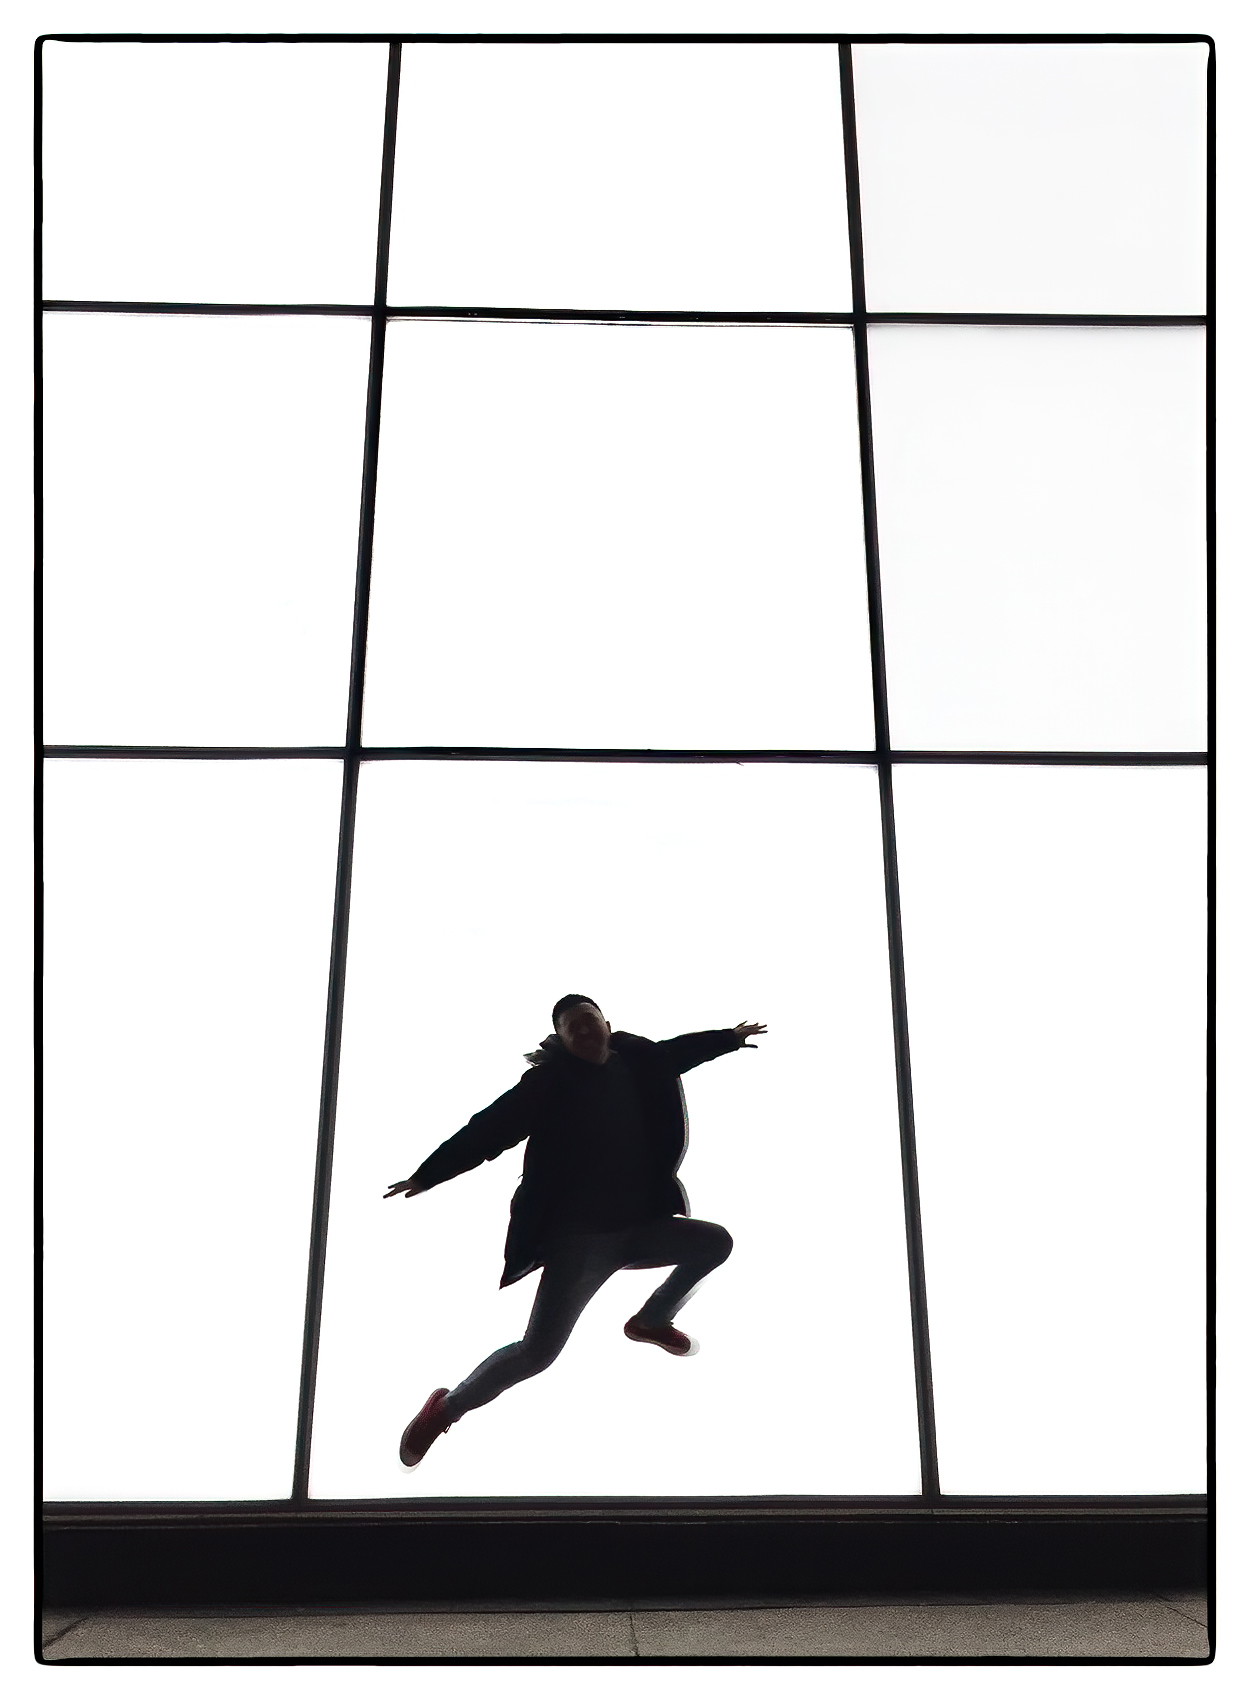 chang-jiang-is-silhouetted-as-he-jumps-up-in-front-of-a-white-retail-sign-in-dundas-square-toronto